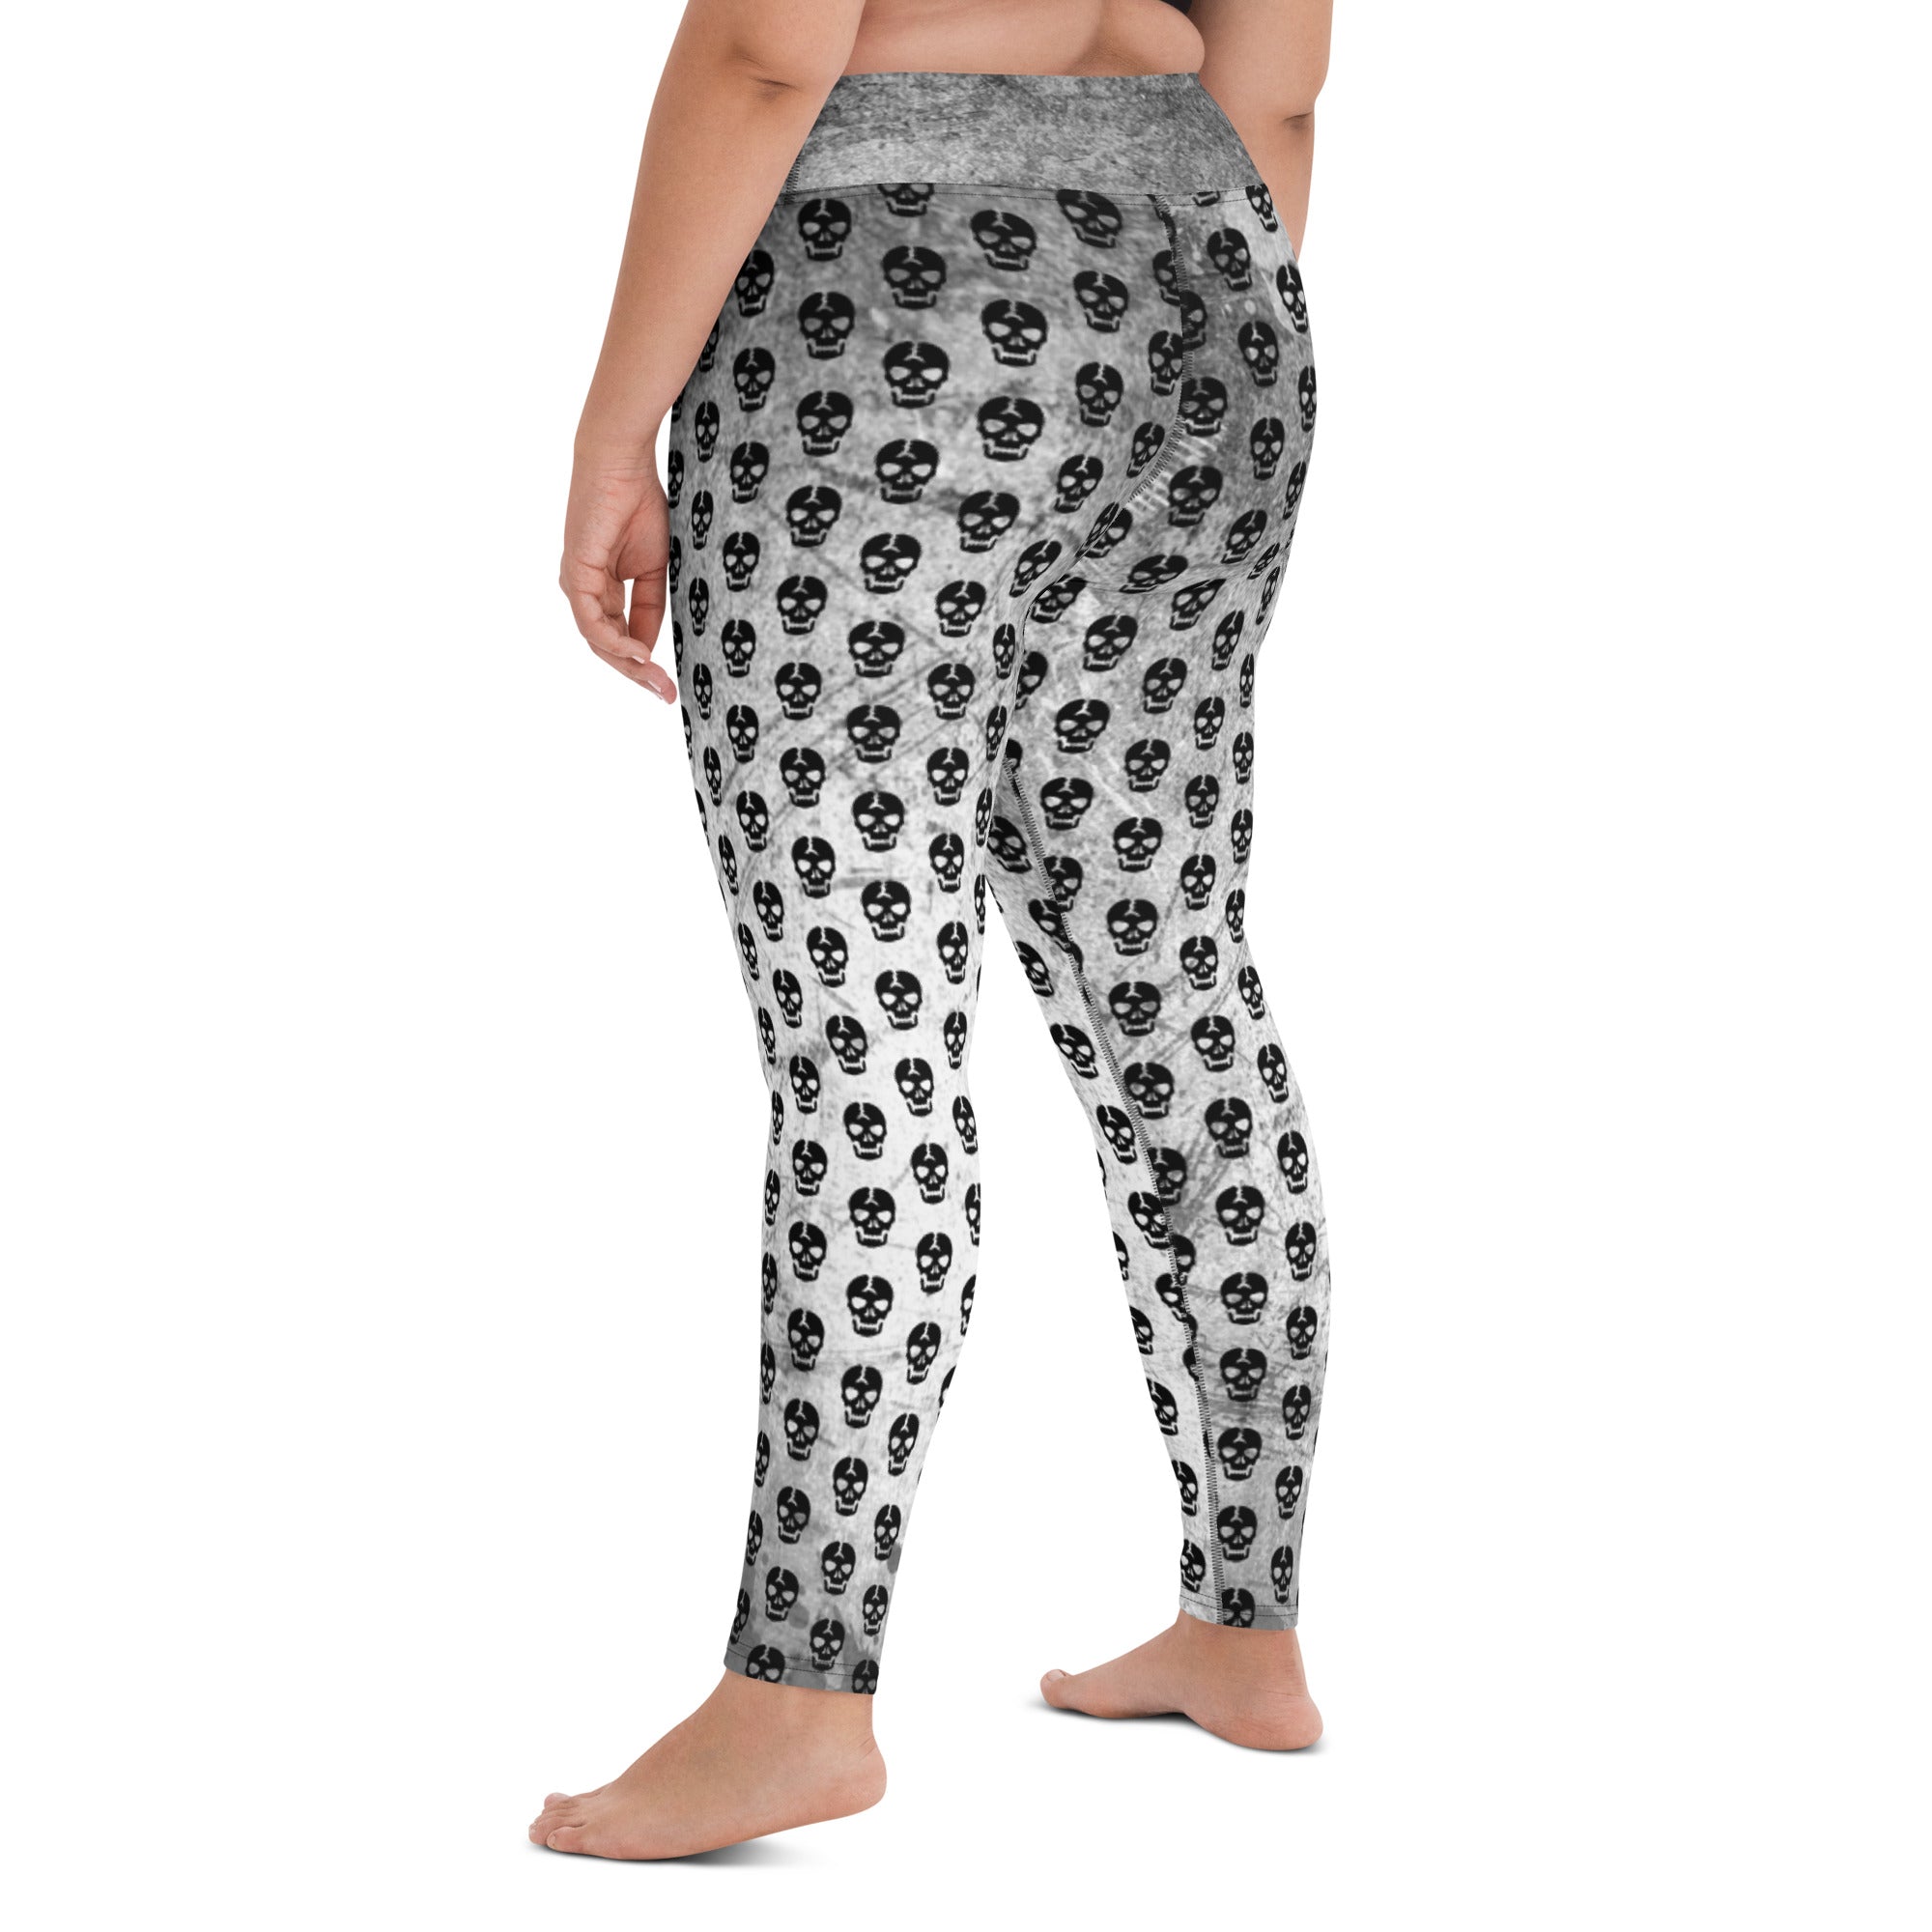 Women's Yoga Clothing - All Sale & Clearance Items | Beyond Yoga